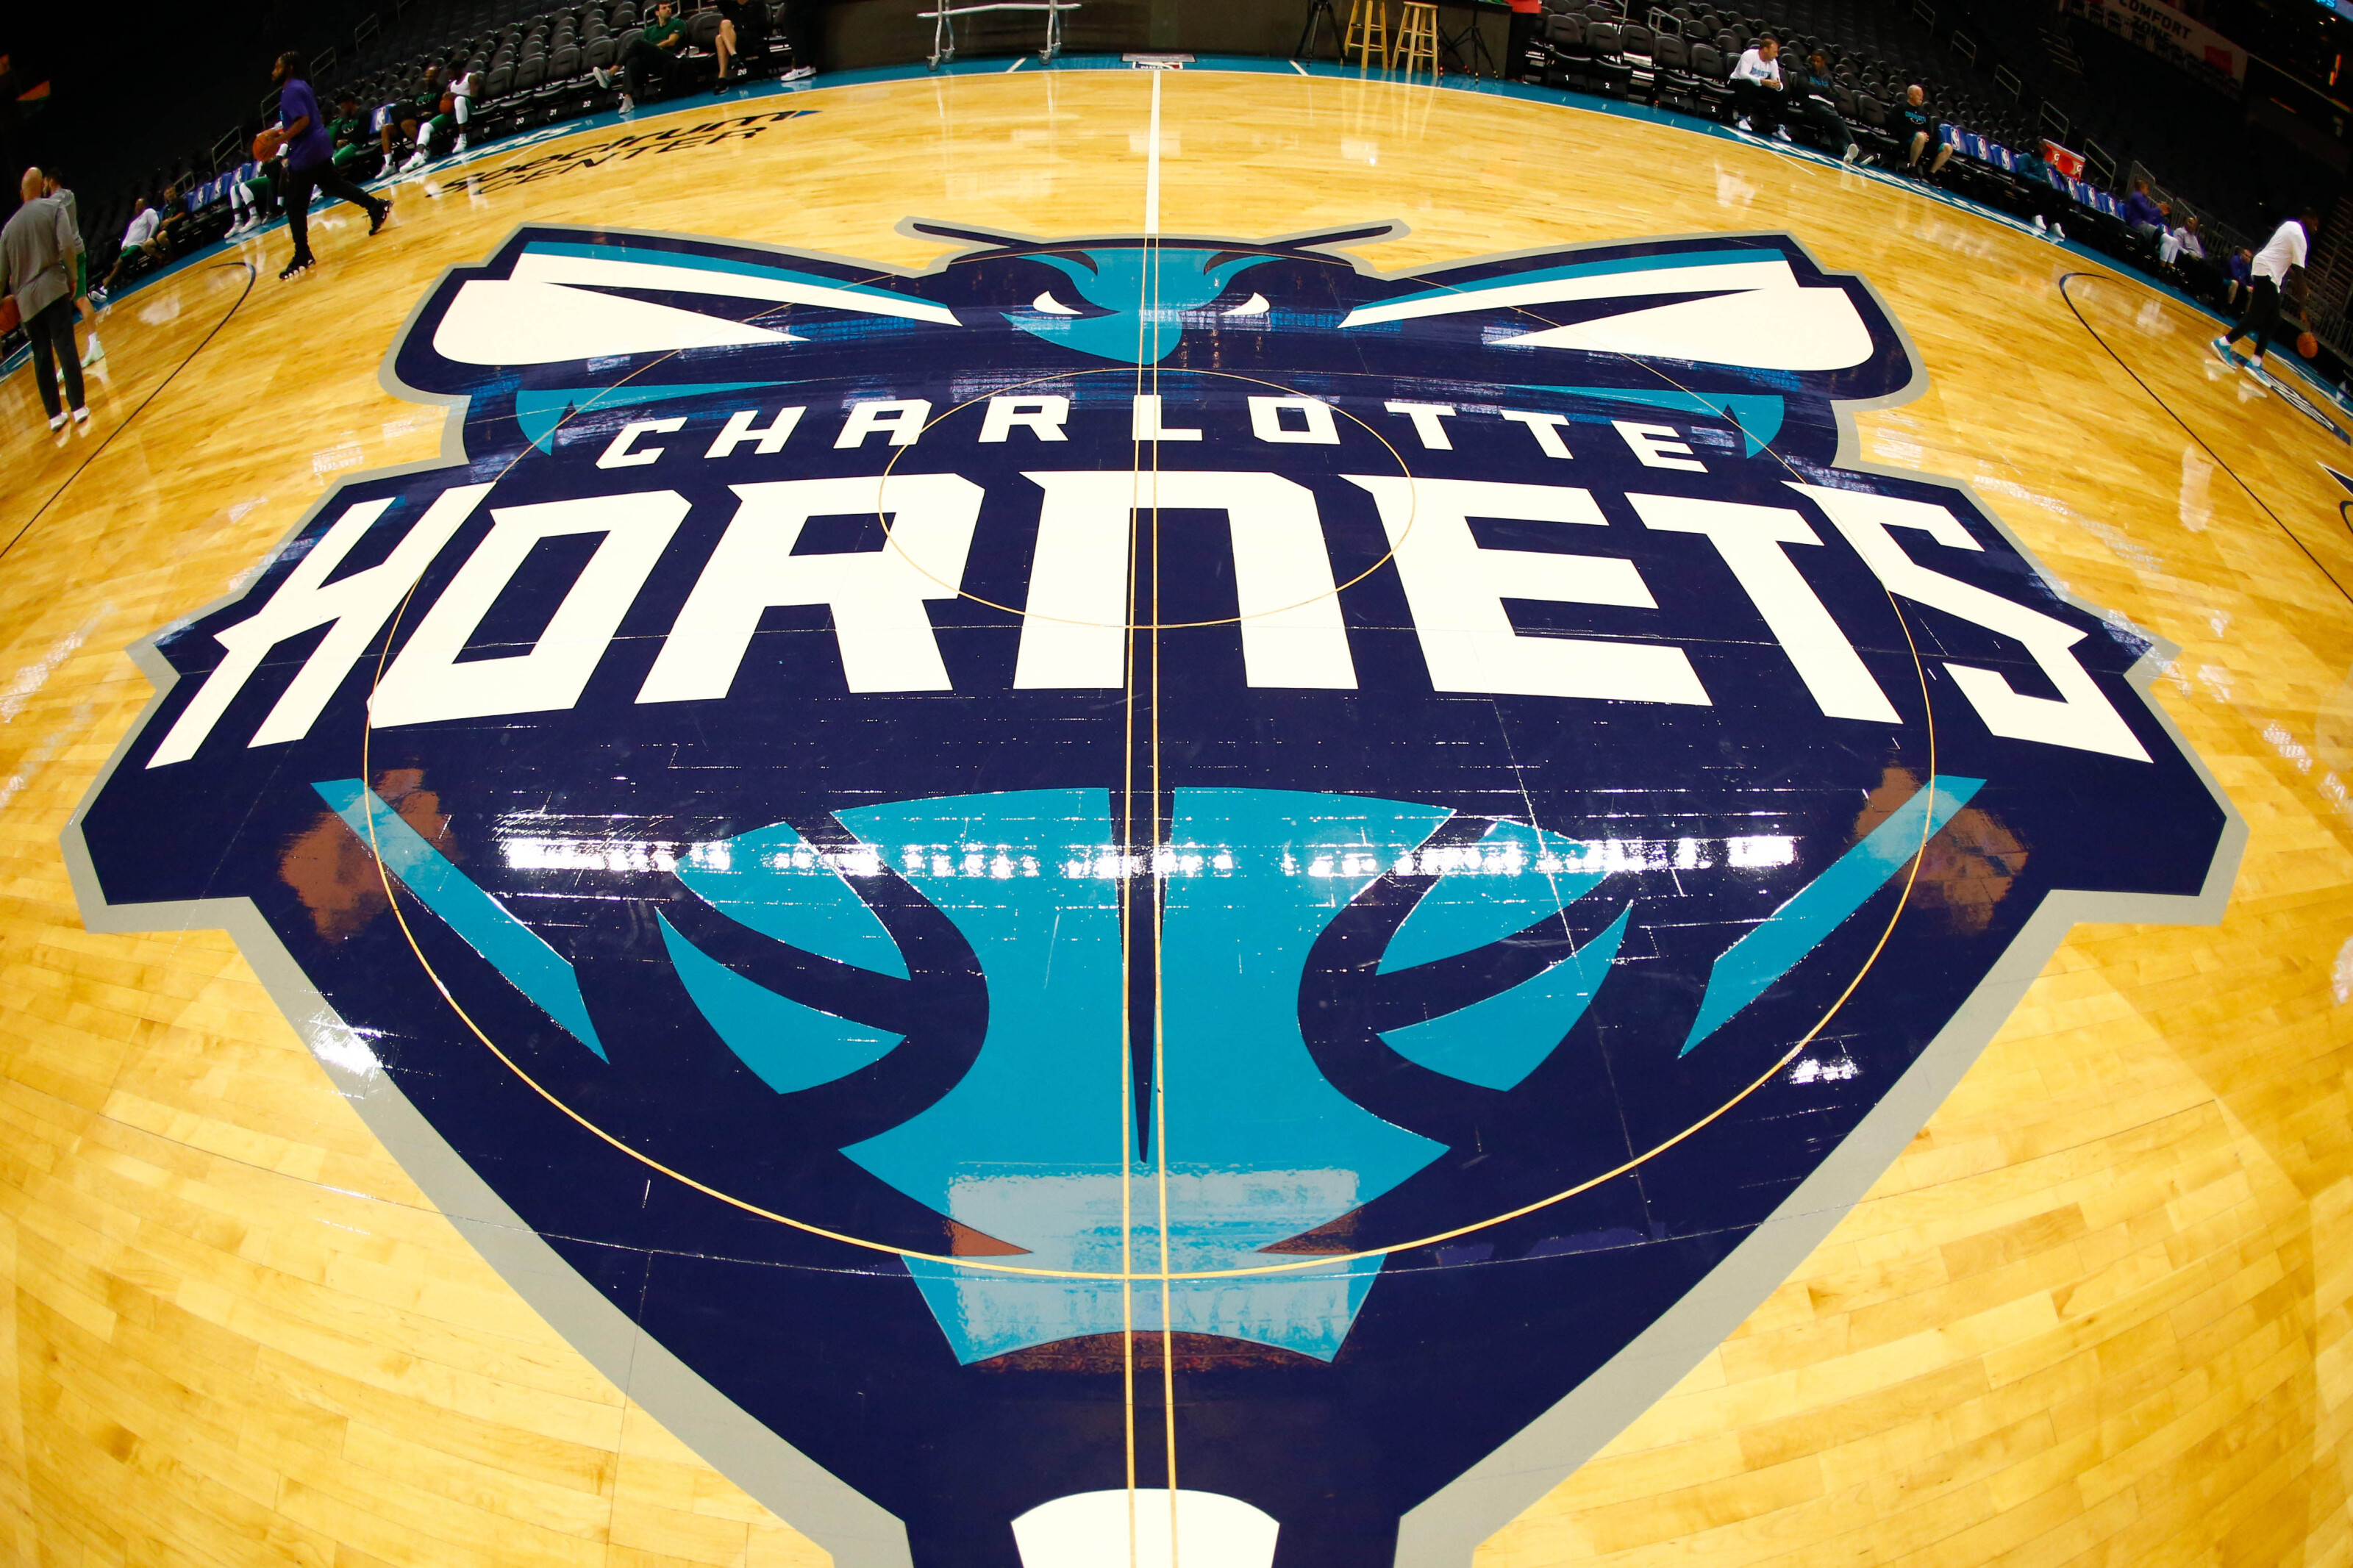 Hornets top Wizards 124-108, fail to improve play-in seeding